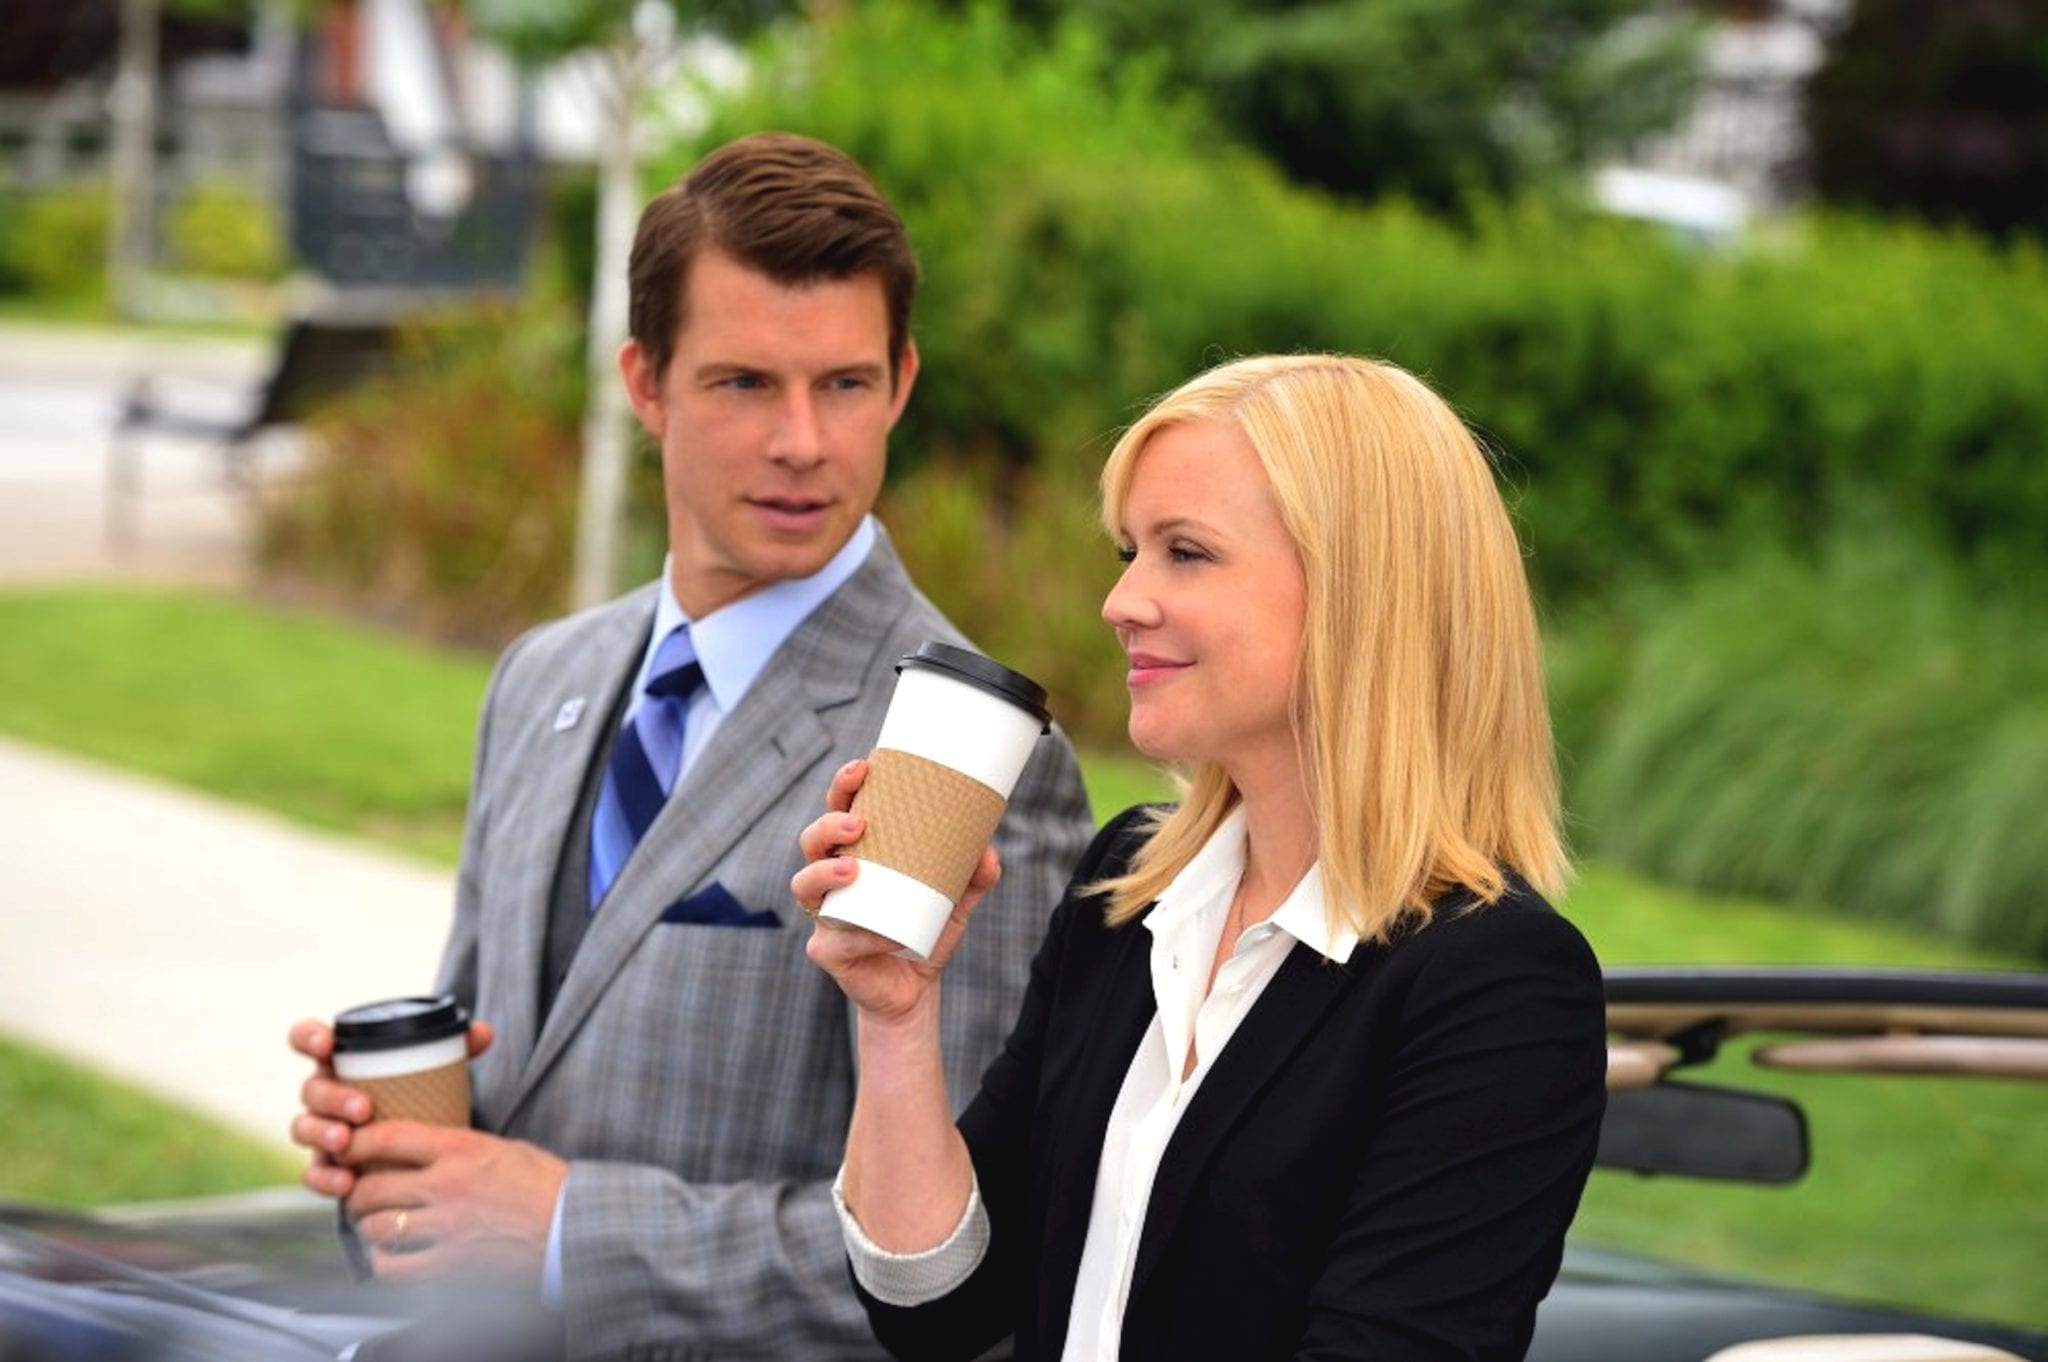 A Scene from Martha Williamson's Signed, Sealed, Delivered featuring Eric Mabius as Oliver and Kristin Booth as Shane